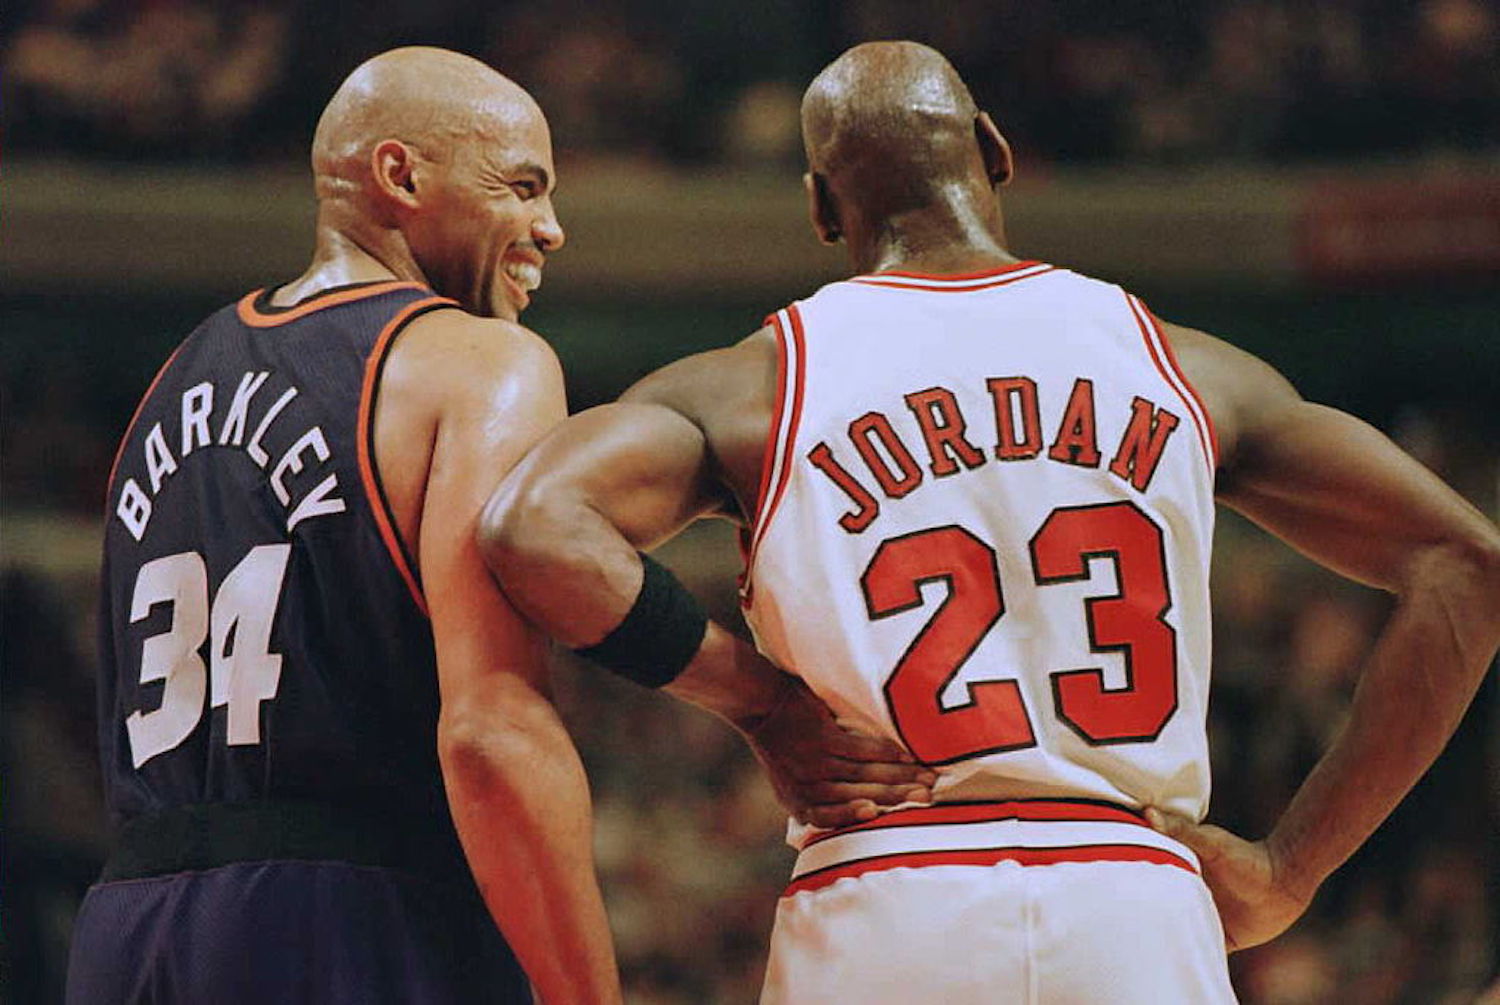 Charles Barkley recently gave his pick for the best 1-on-1 player in NBA history, and it's not Michael Jordan or Kobe Bryant.